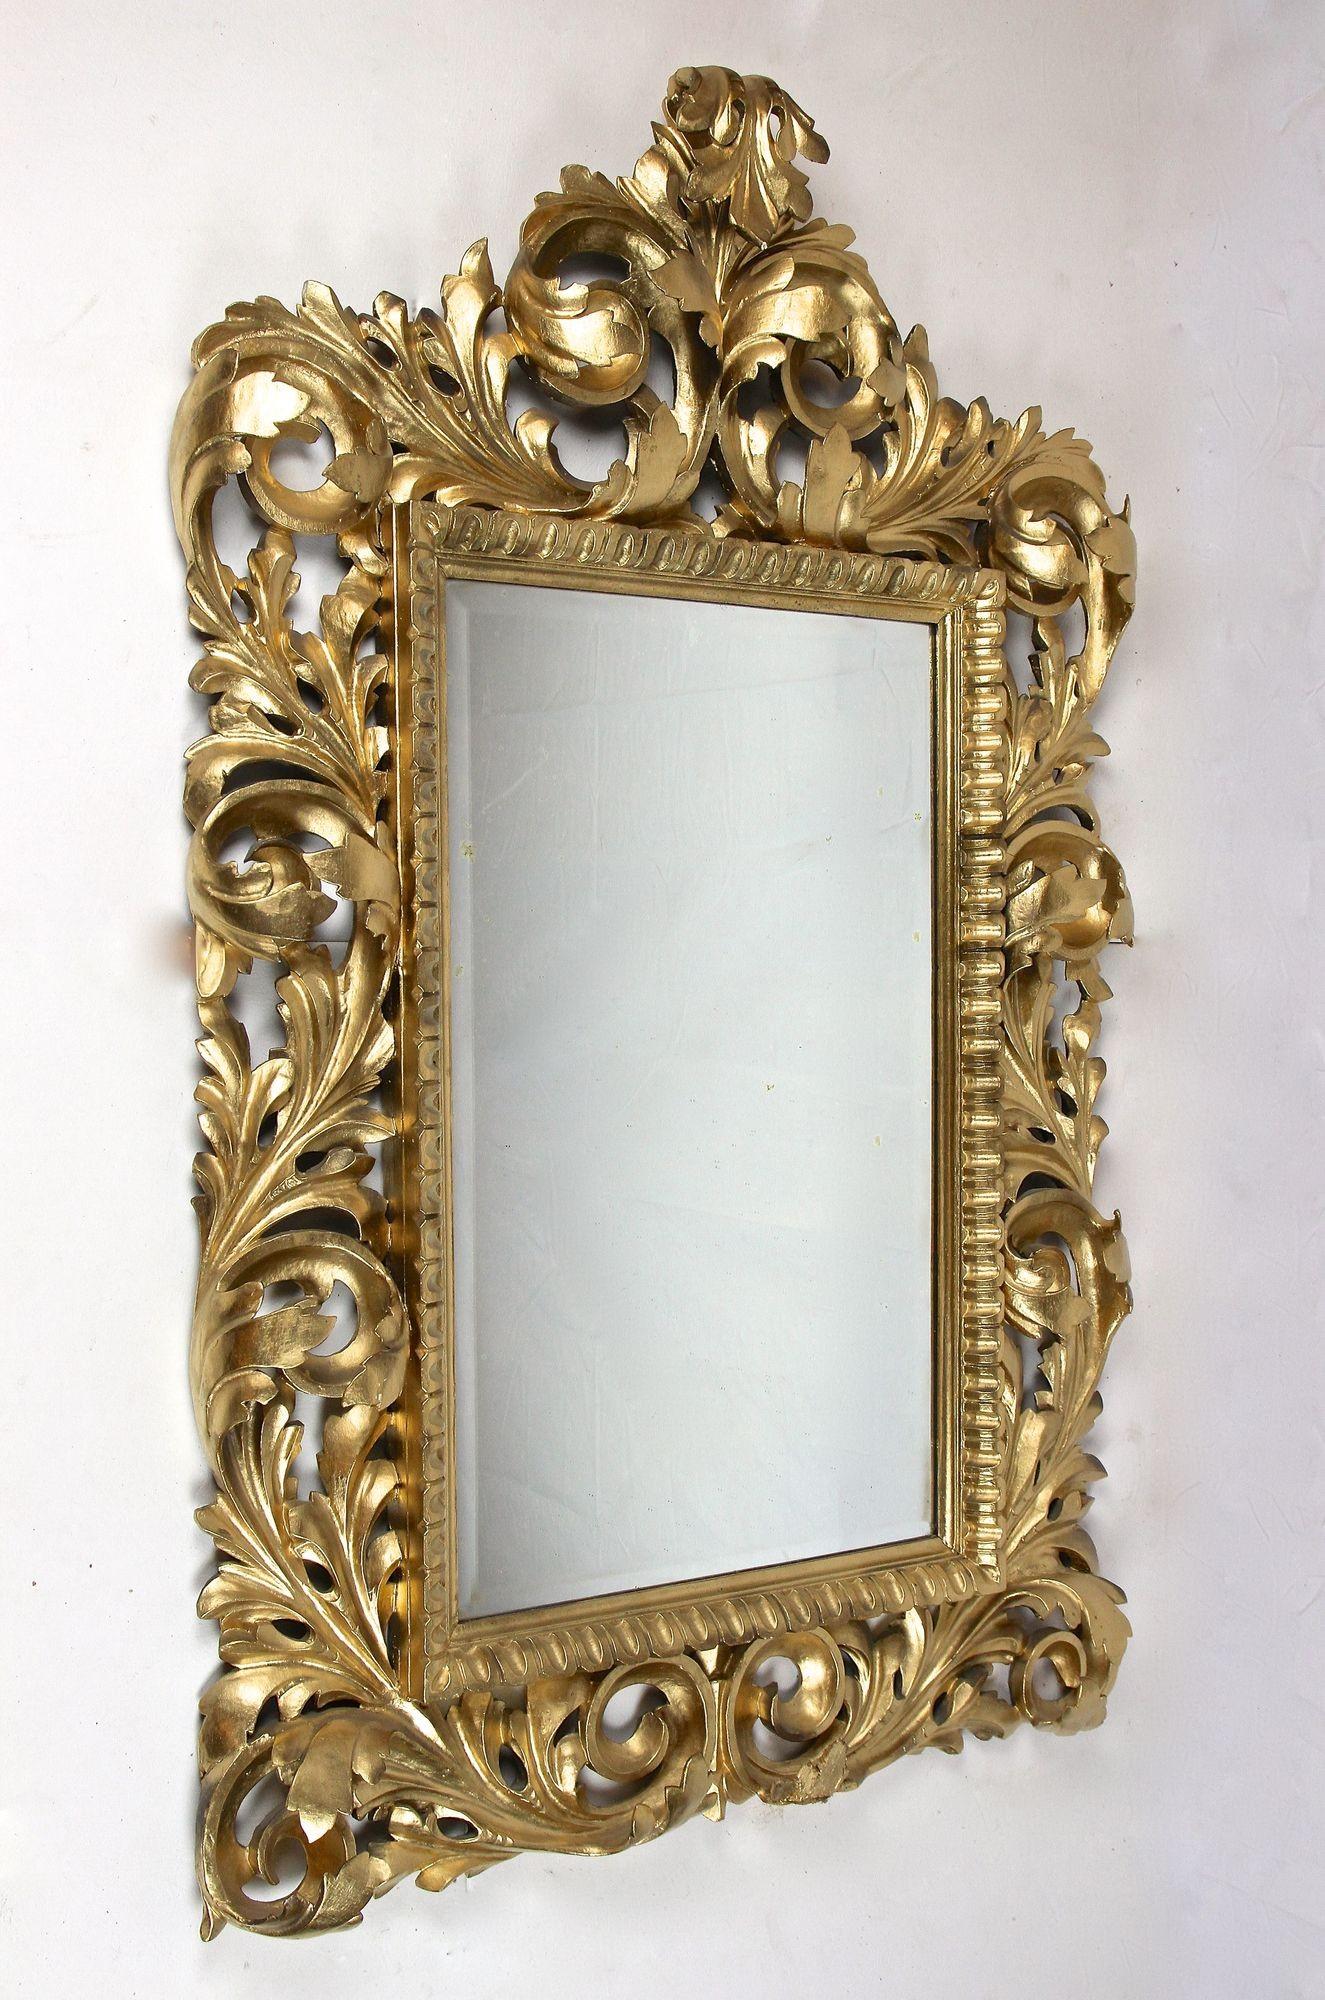 Eye-catching gilt florentine wall mirror out of Italy dating back to the end of the 19th century around 1890. The large, outstanding looking, open worked frame is ornamented by elaborately handcarved acanthus leaf motifs, confering the piece a sense